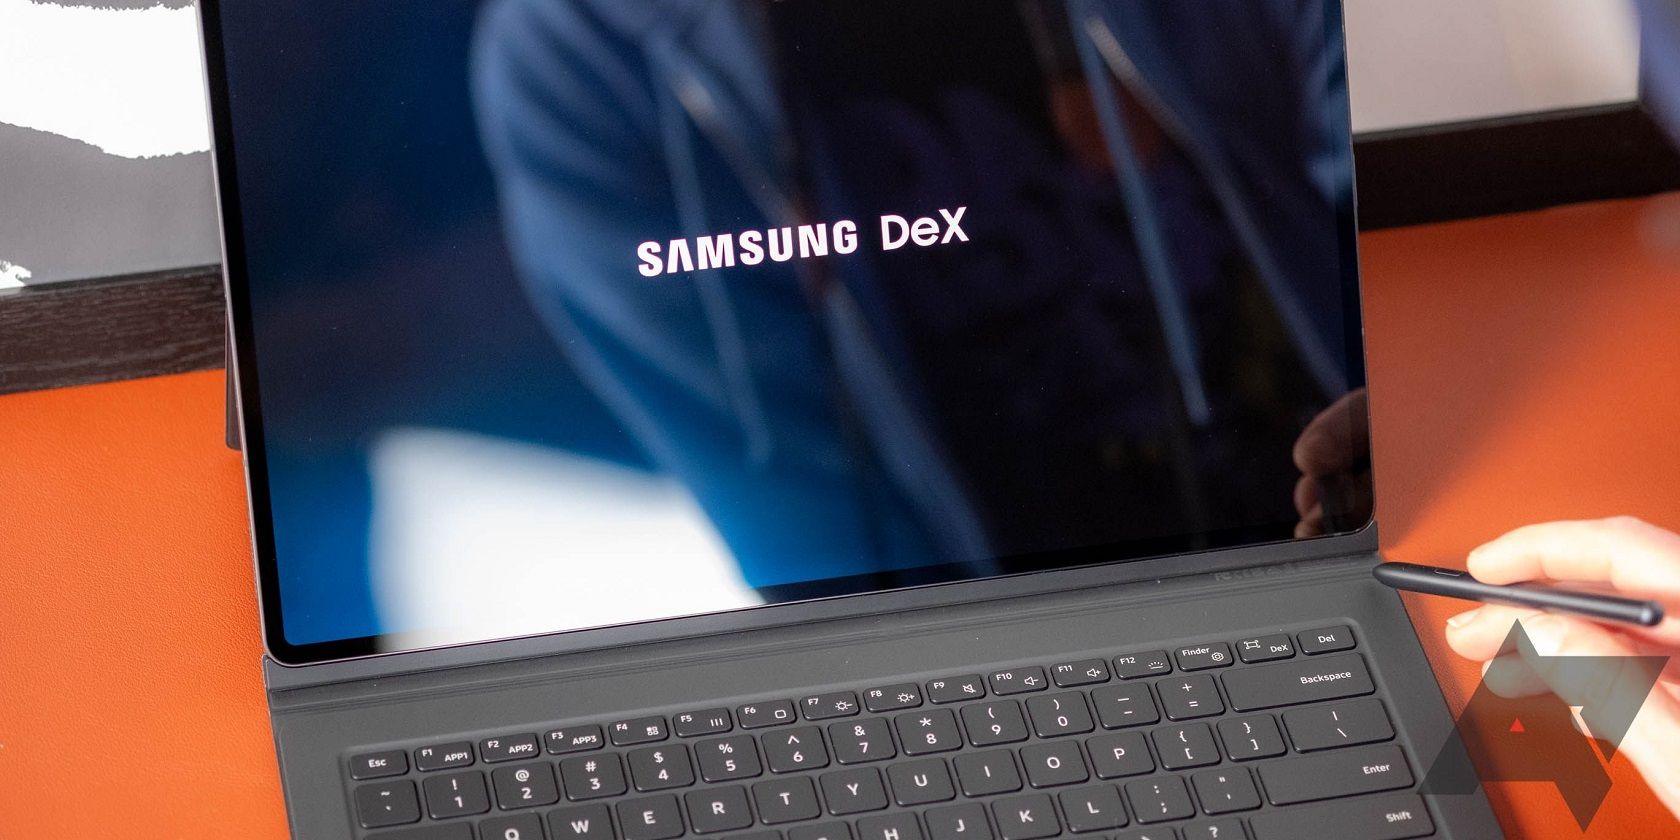 Image shows a Samsung tablet with a keyboard attached, open, with the words Samsung DeX displayed on the screen. A hand is holding a stylus in the lower right corner toward the screen.